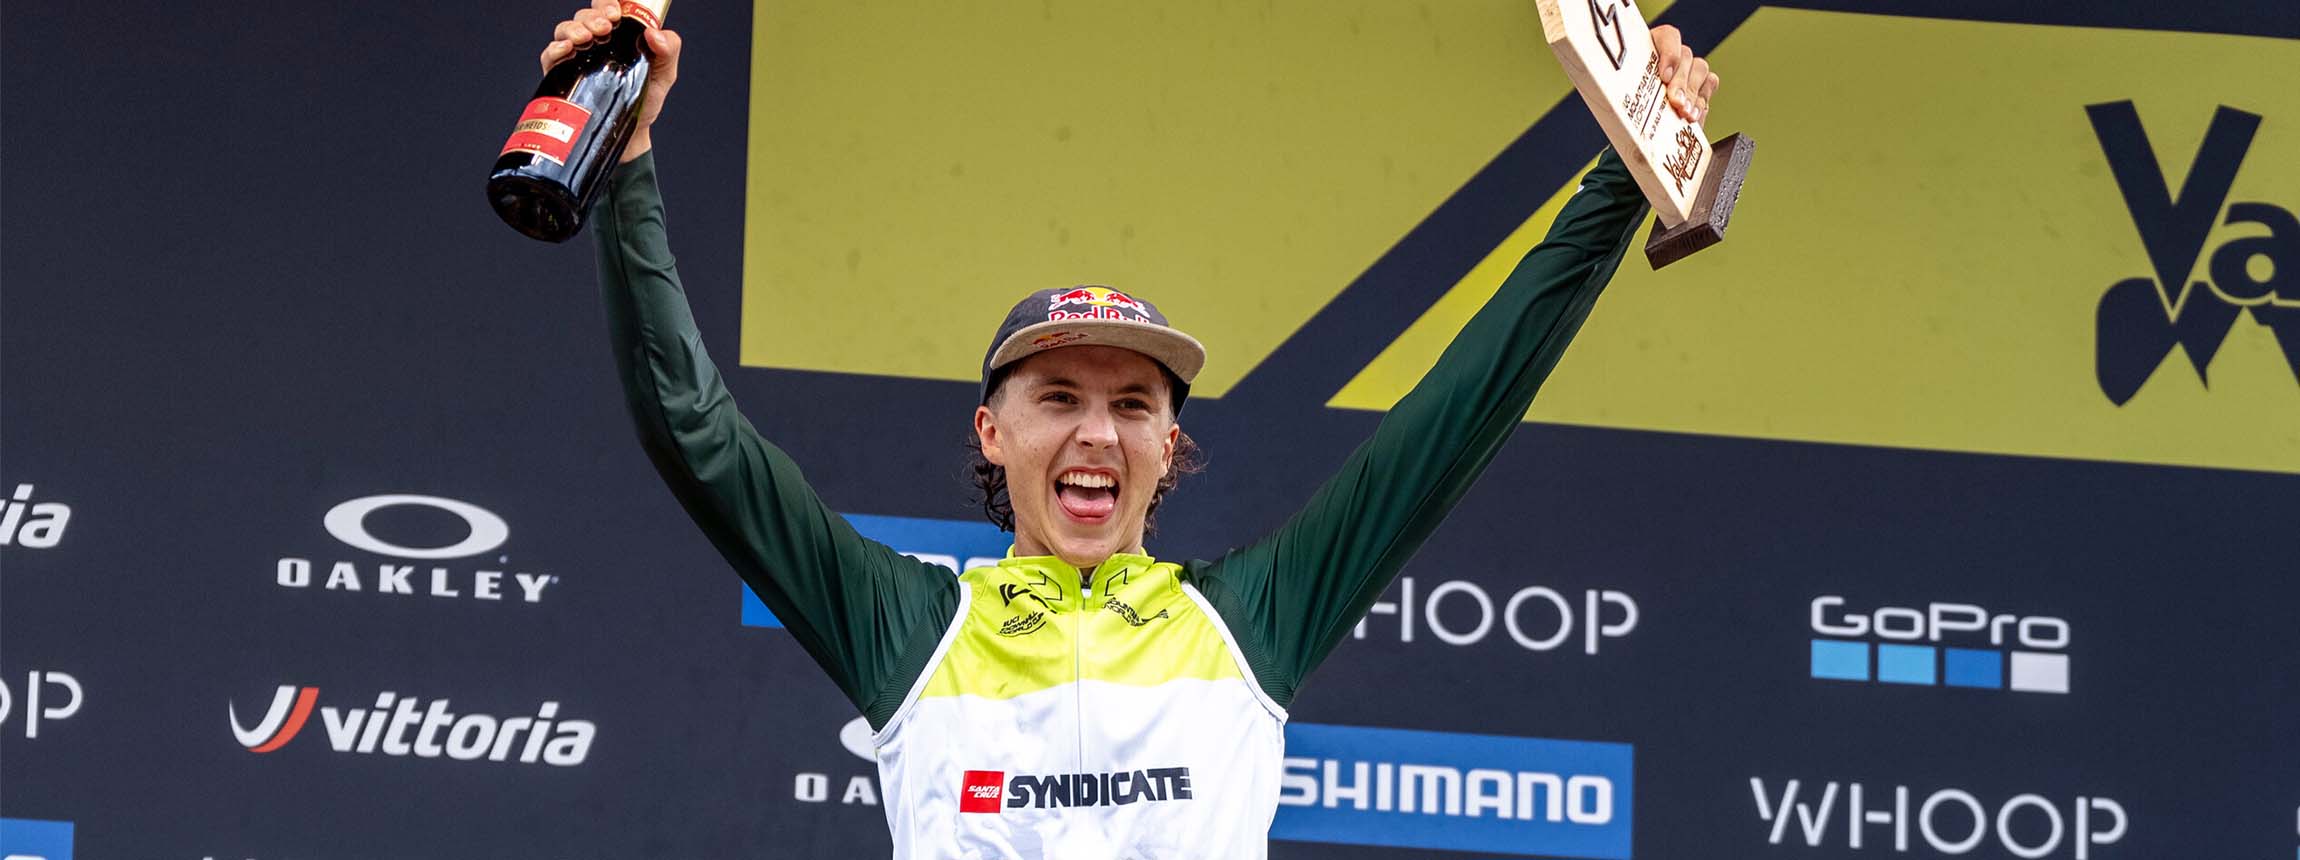 Jackson goldstone celebrates at uci dh world cup in val di sole, italy on july 01, 2023